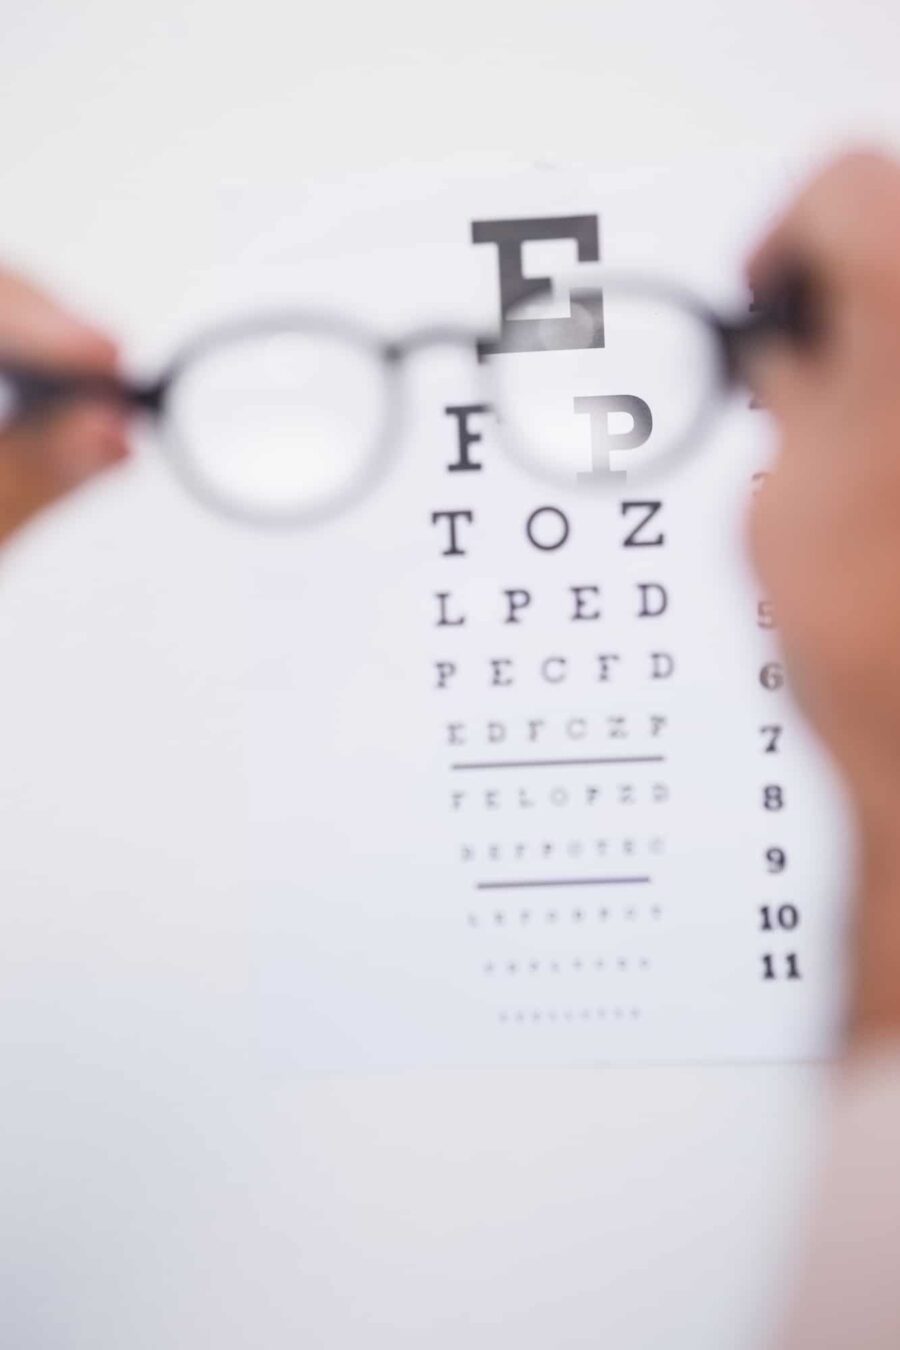 Are You Worried About Your Eyesight? Importance of Good Eyesight